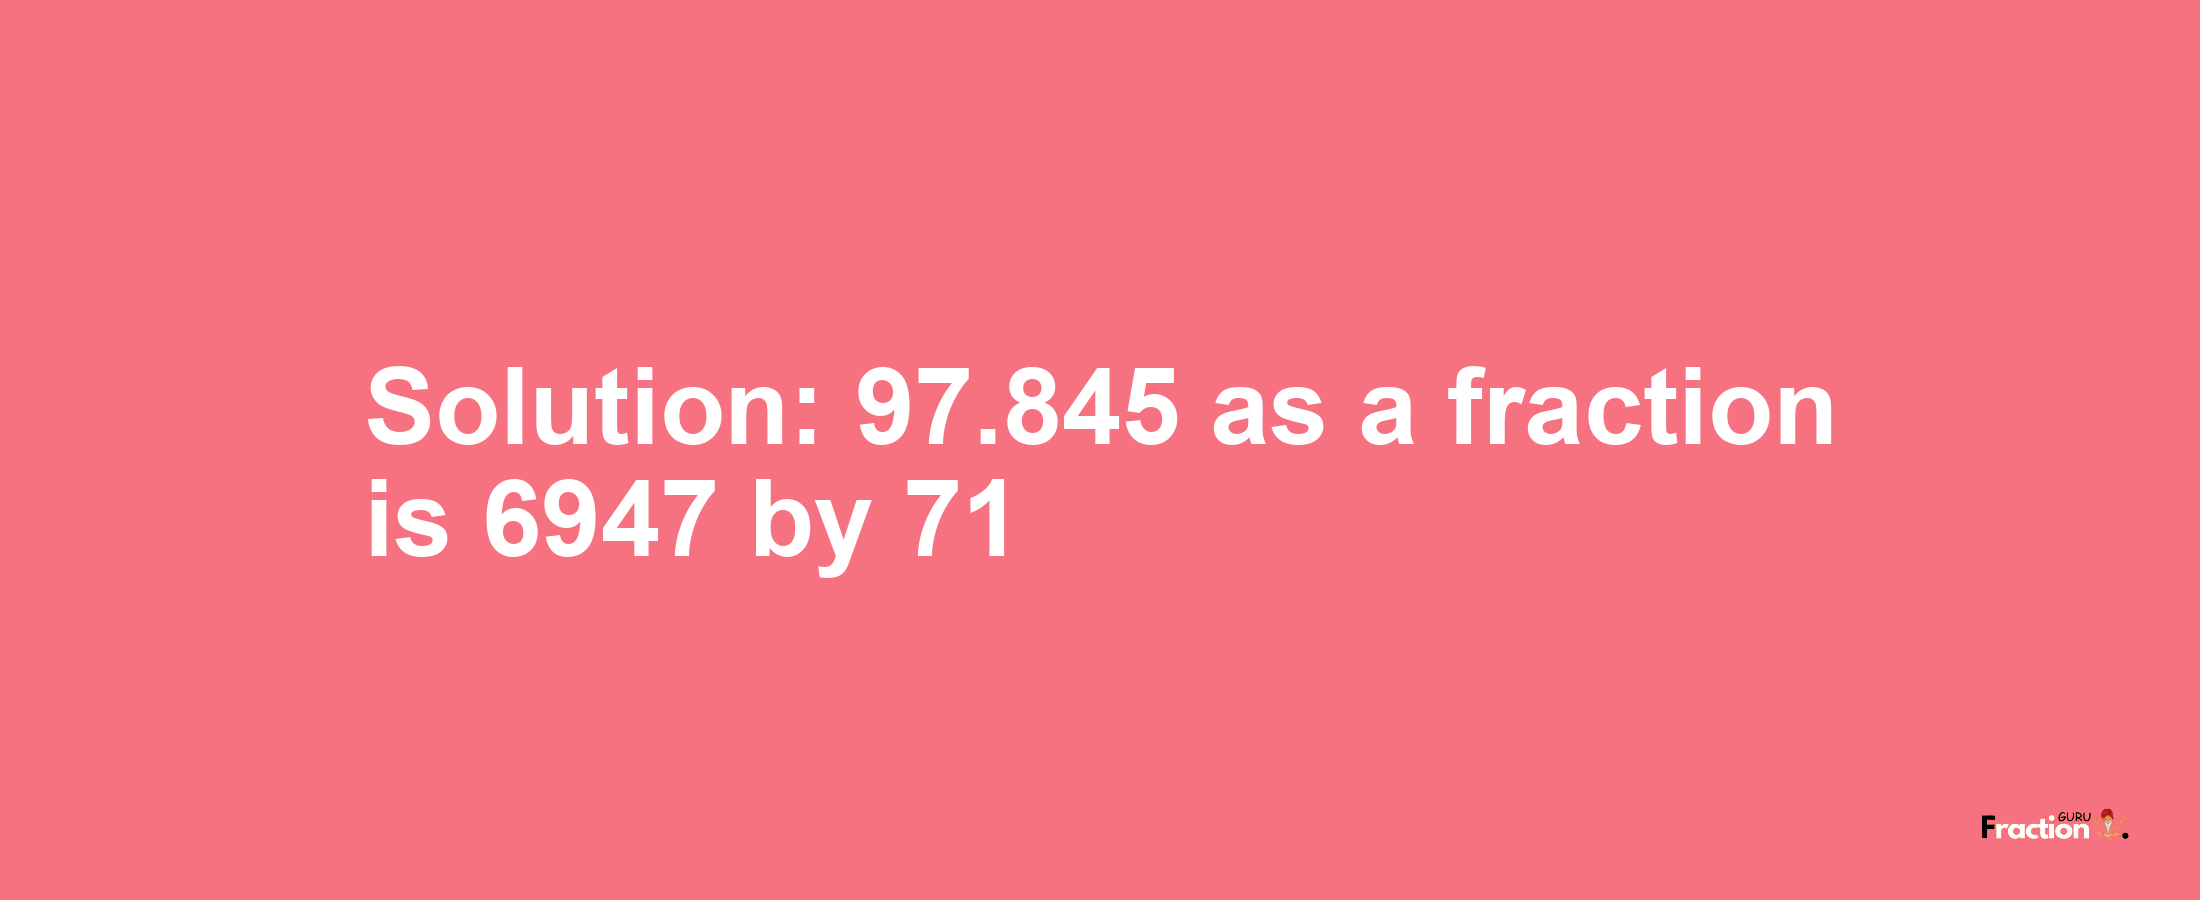 Solution:97.845 as a fraction is 6947/71